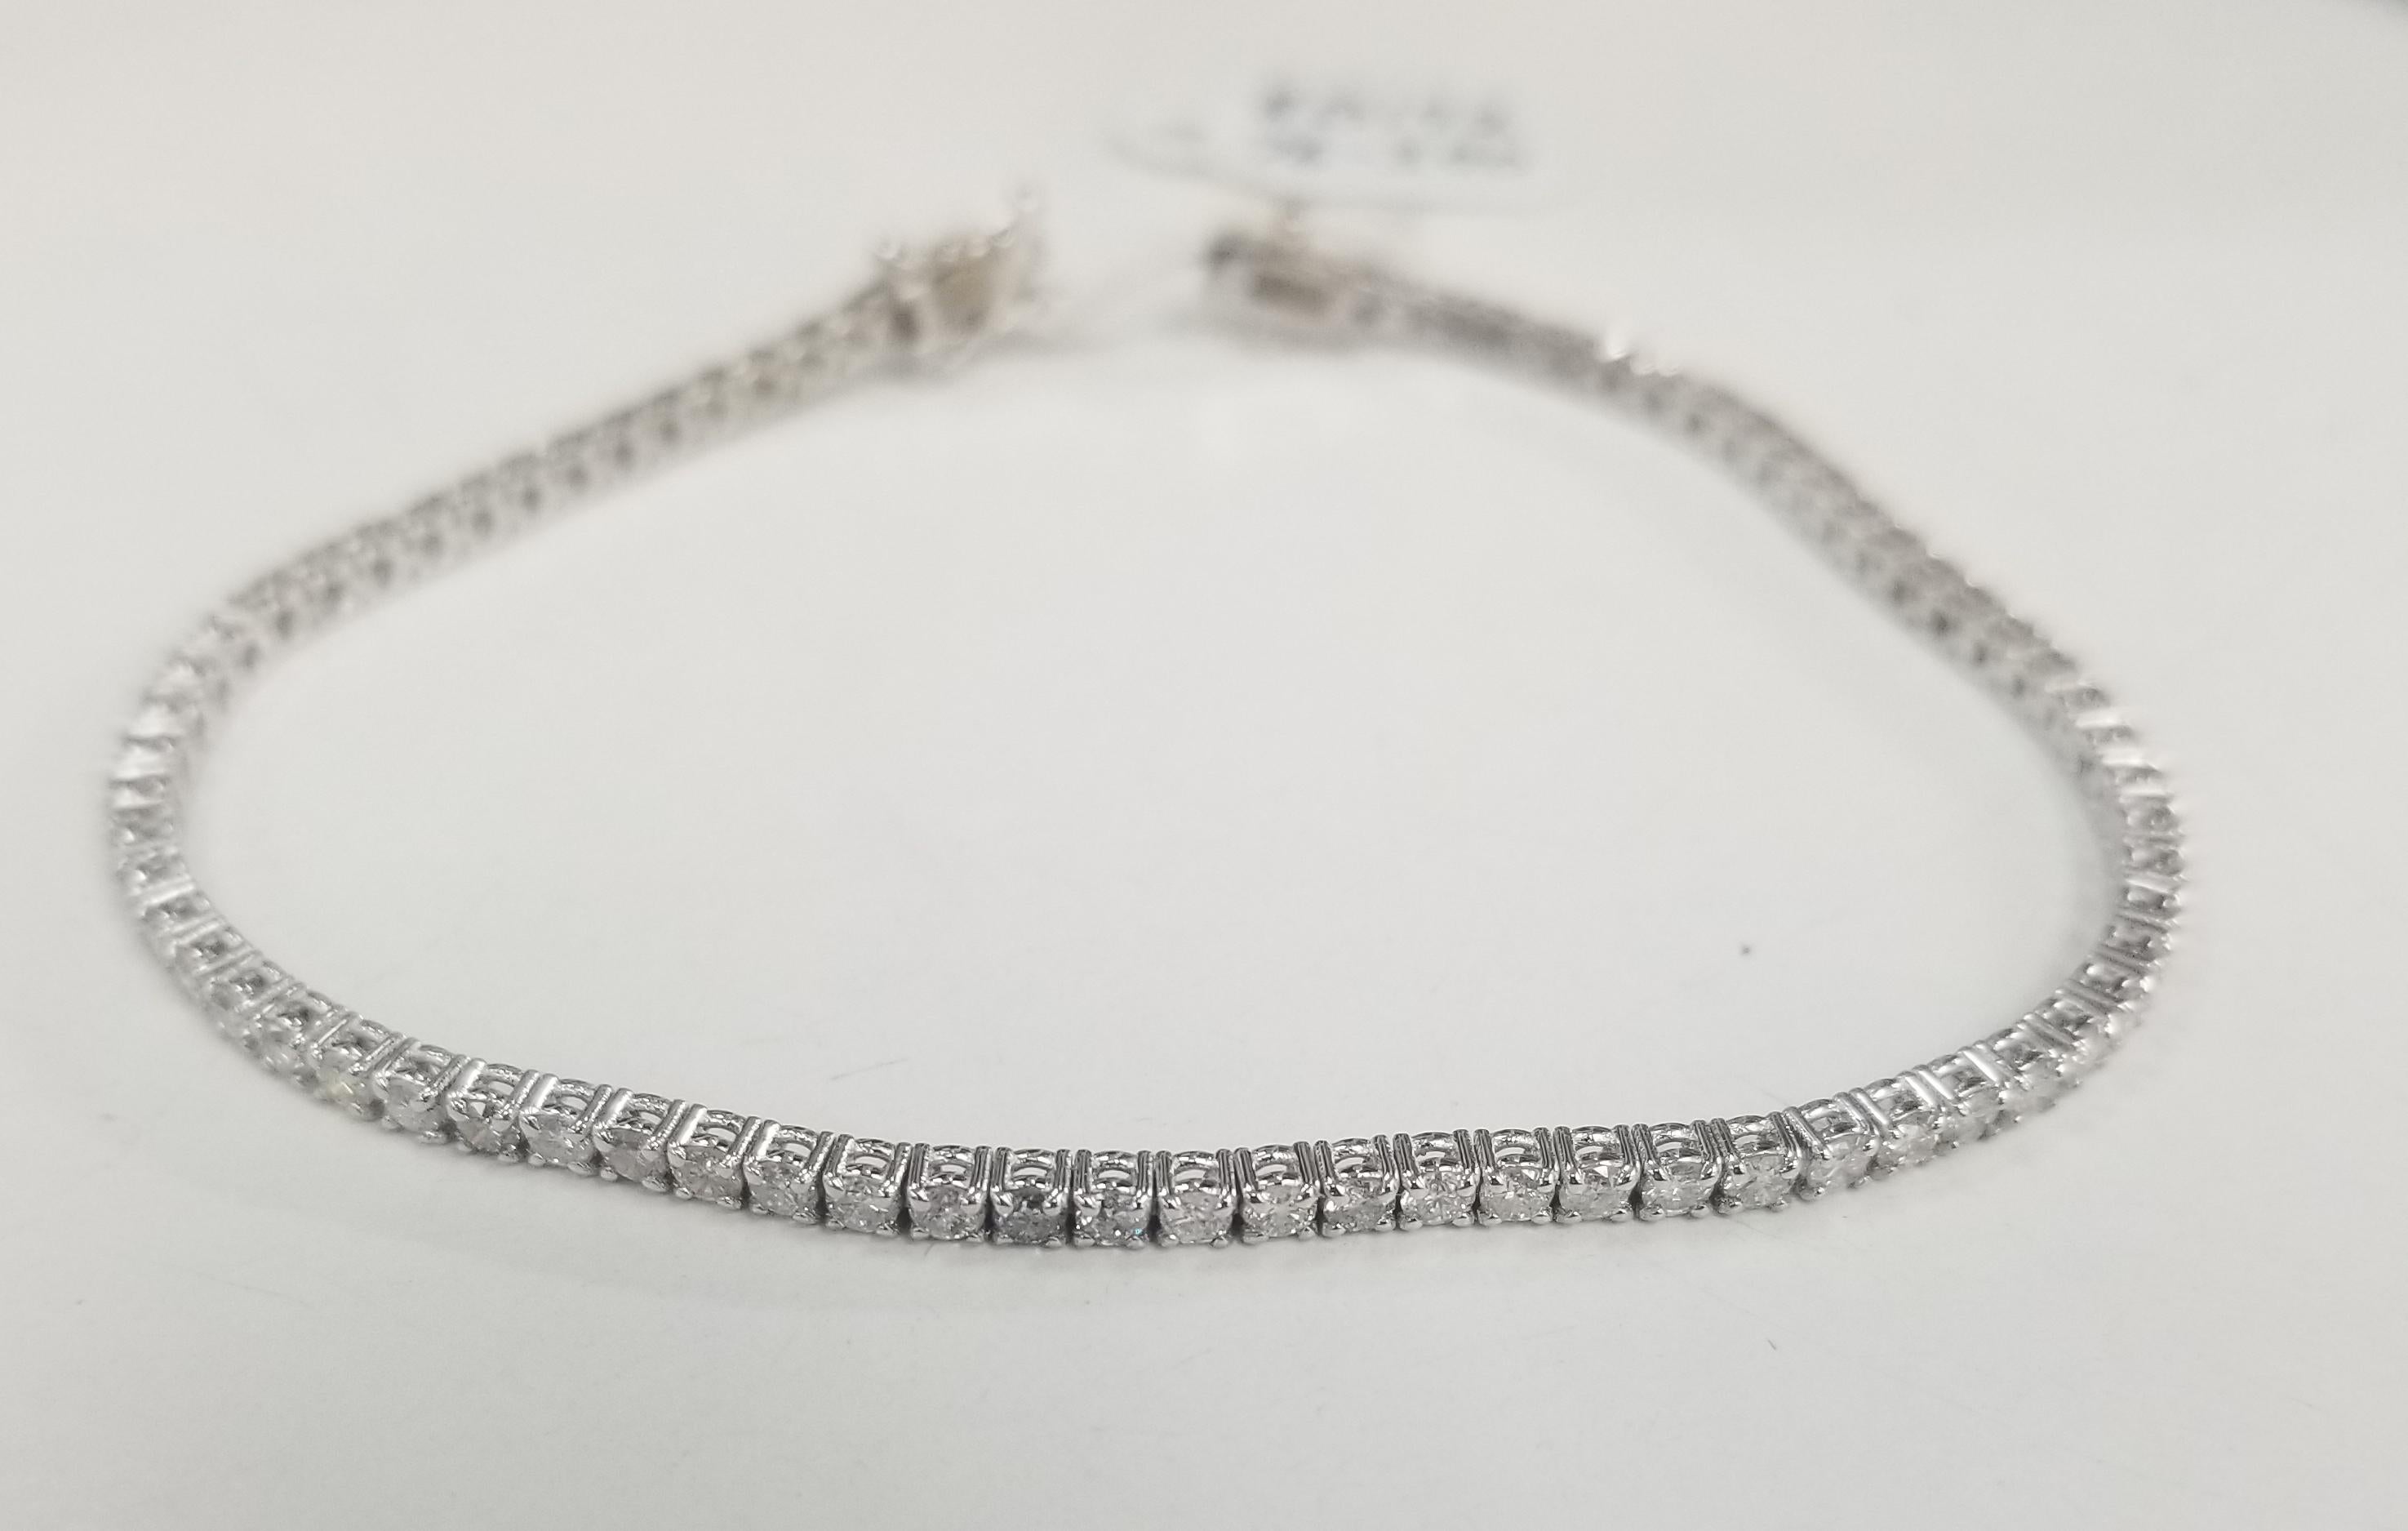 Specifications:
    main stone:ROUND DIAMONDS
    diamonds: 76 PCS
    carat total weight:approximately 3.00 CTW
    color: H-I
    clarity:SI1-2
    brand:CUSTOM MADE
    metal:14K WHITE gold
    type:BRACELET
    weight:7.0 gr
    length:7